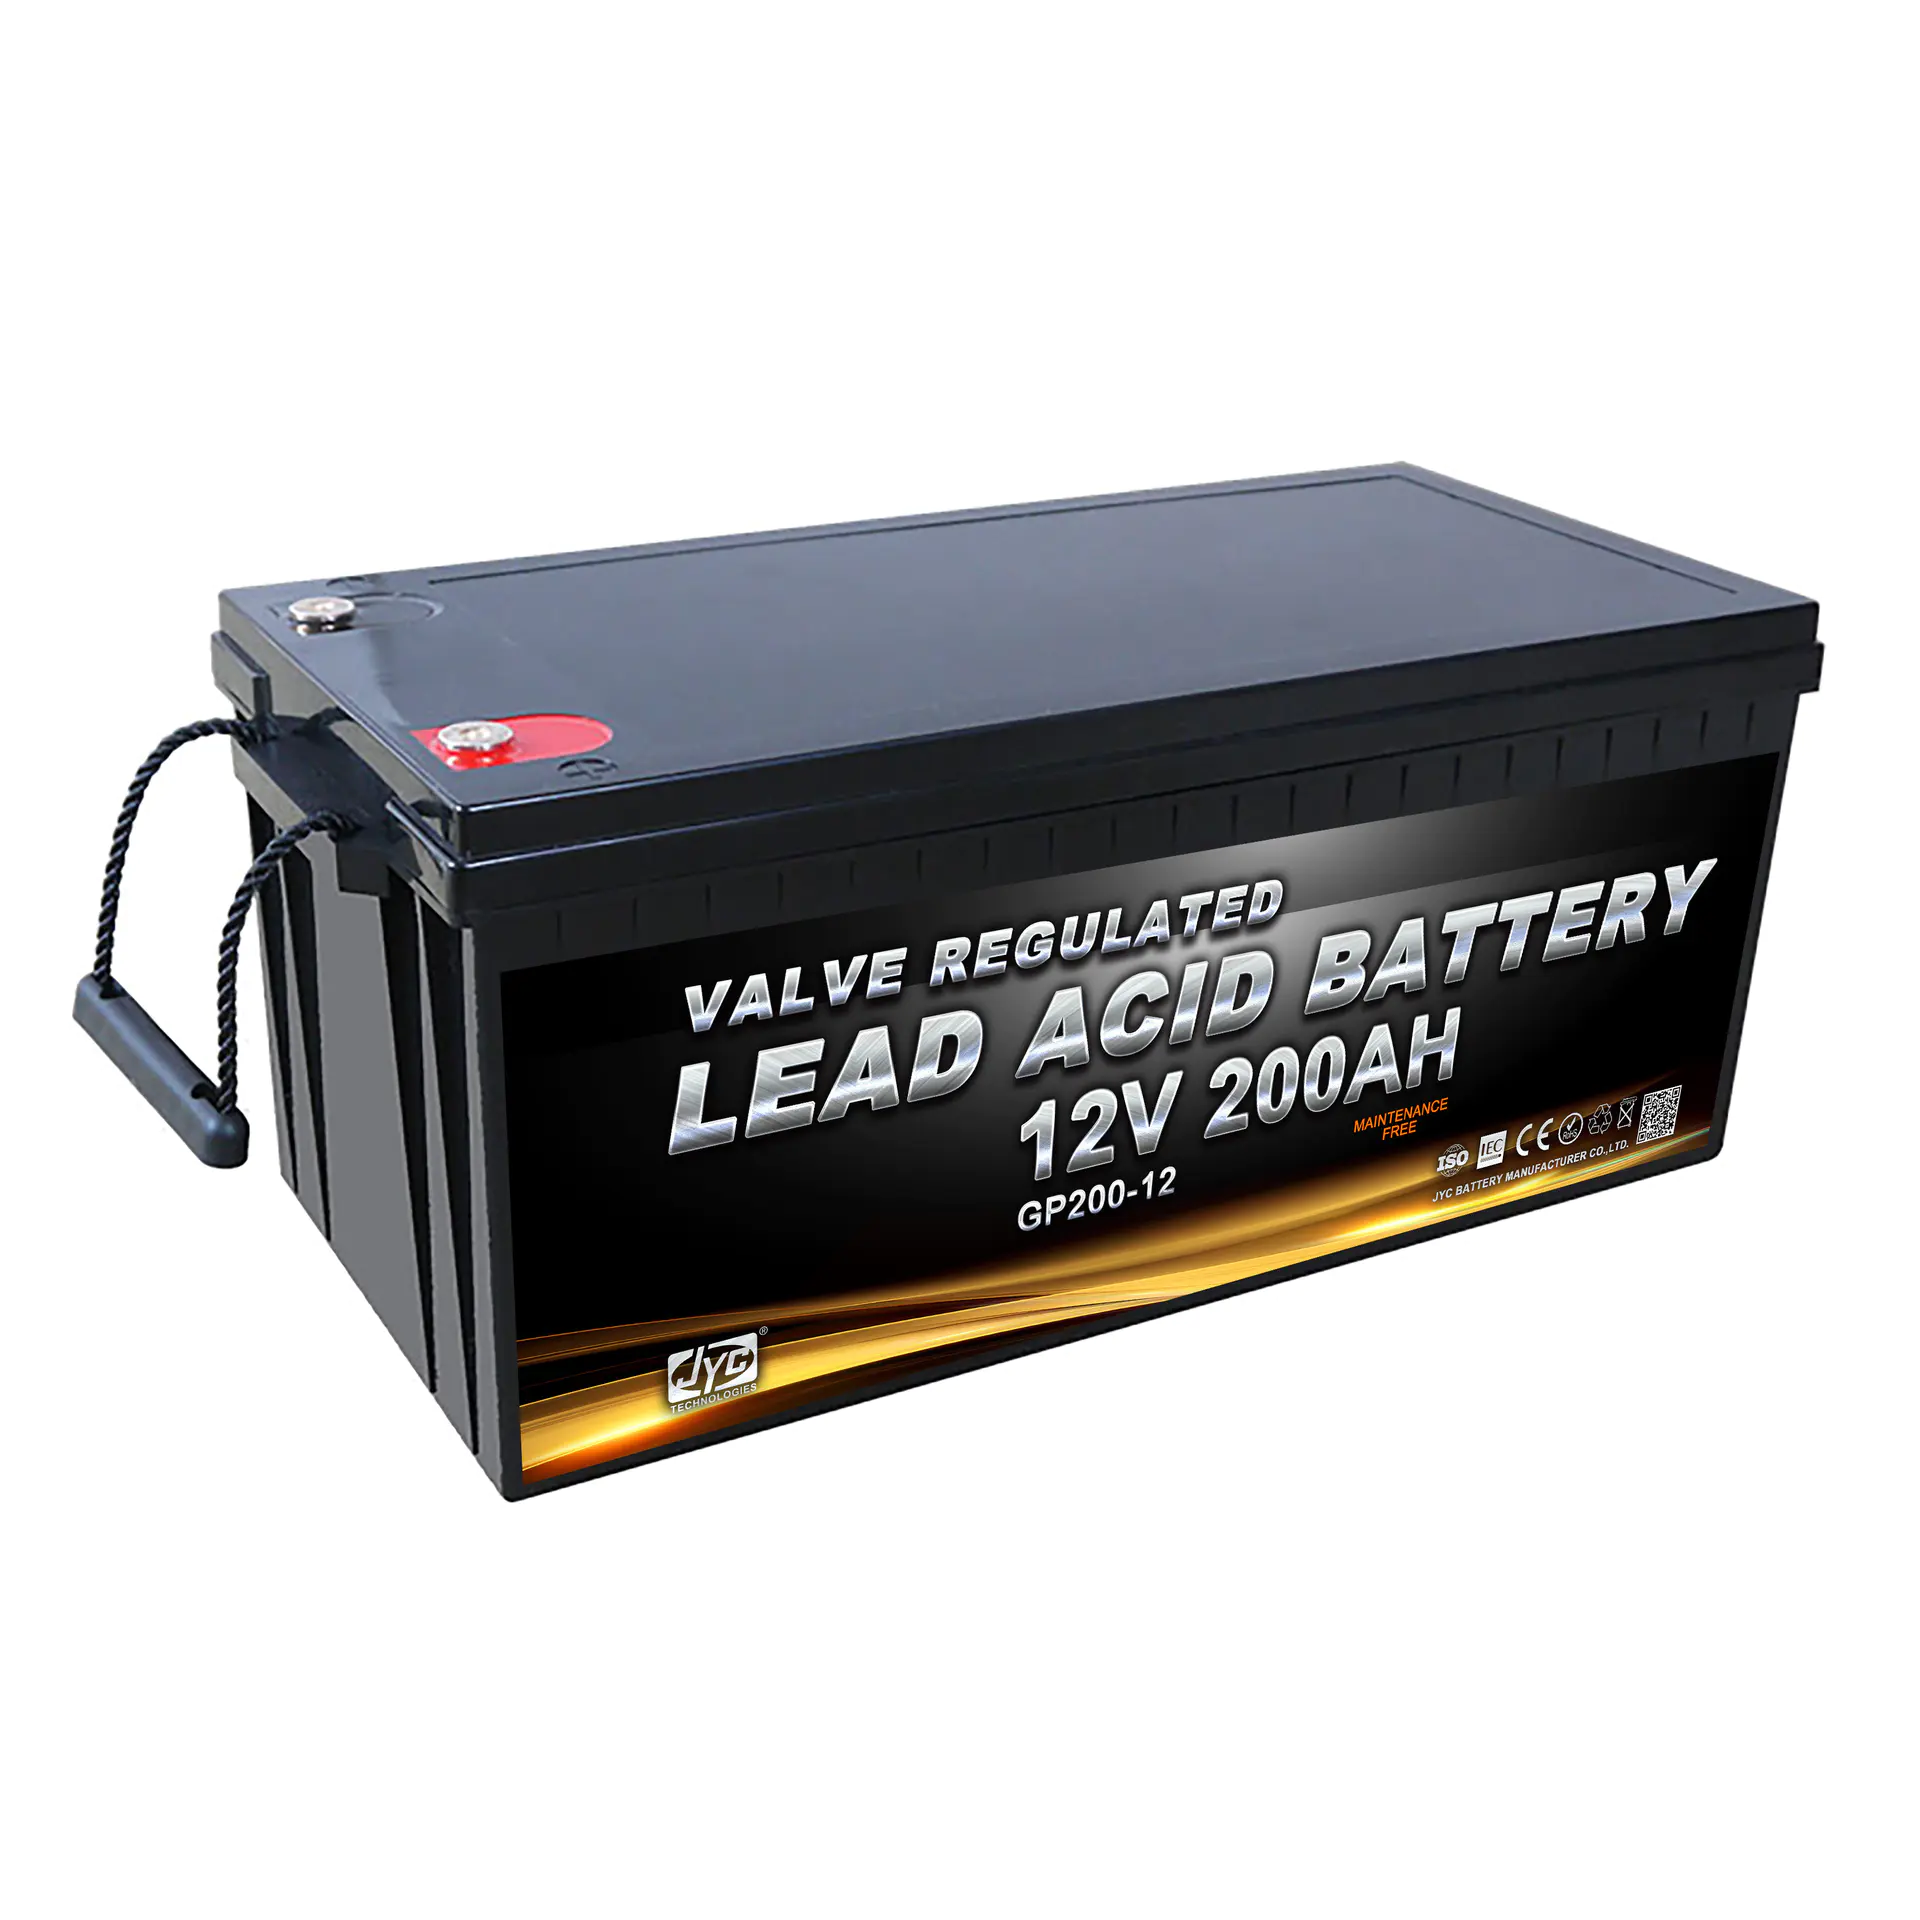 12V 250Ah Maintenance-Free Msds Sealed Lead Acid Solar Battery With High Capacity